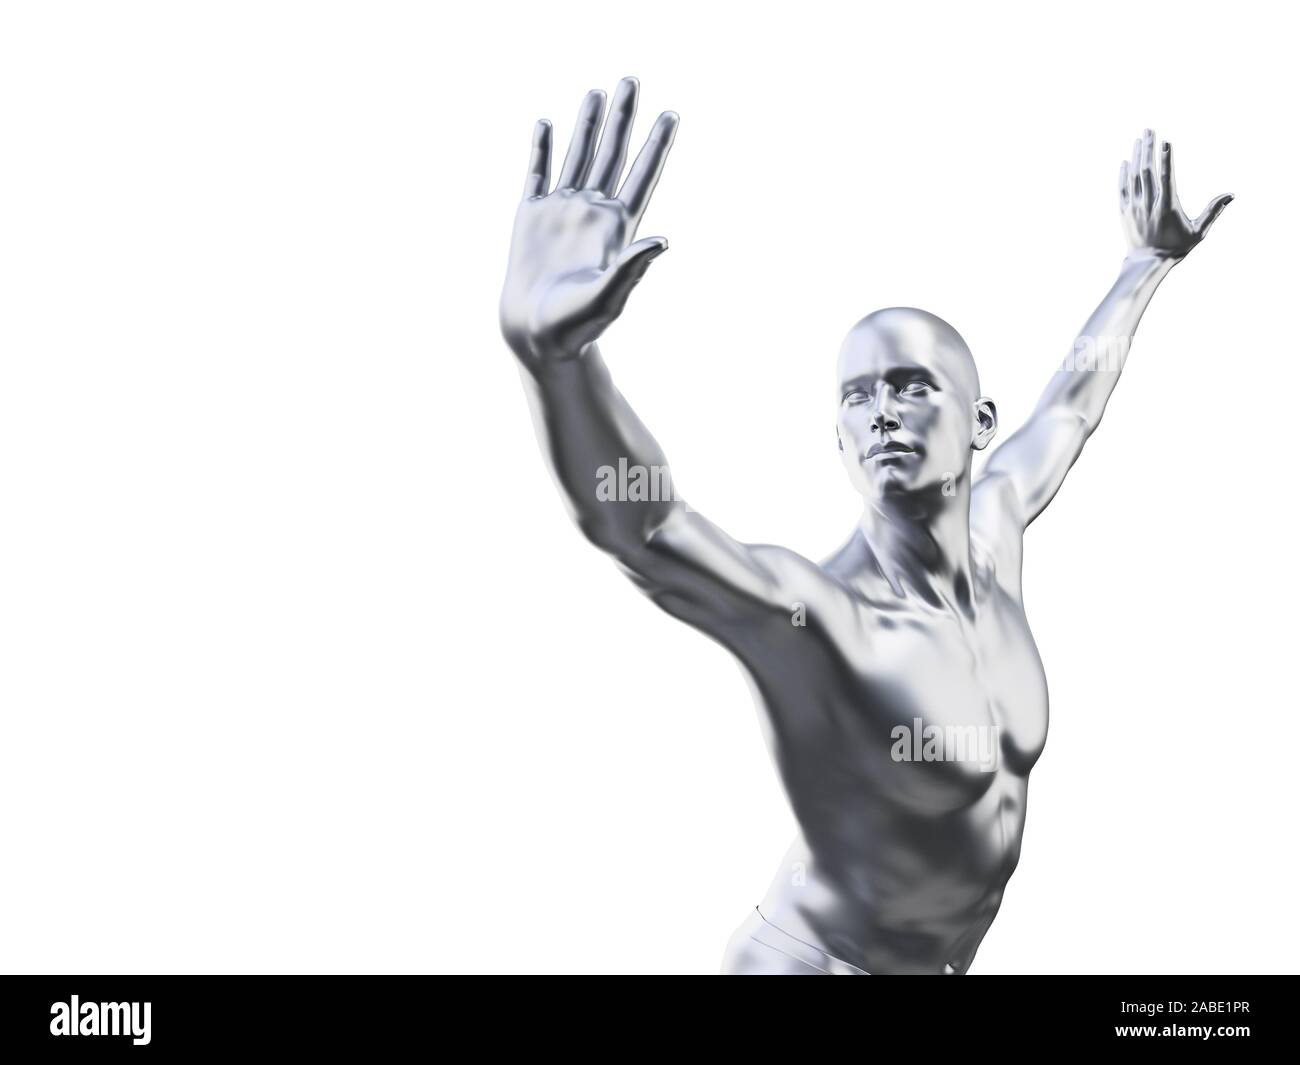 3d rendered illustration of a metal man in defensive pose Stock Photo